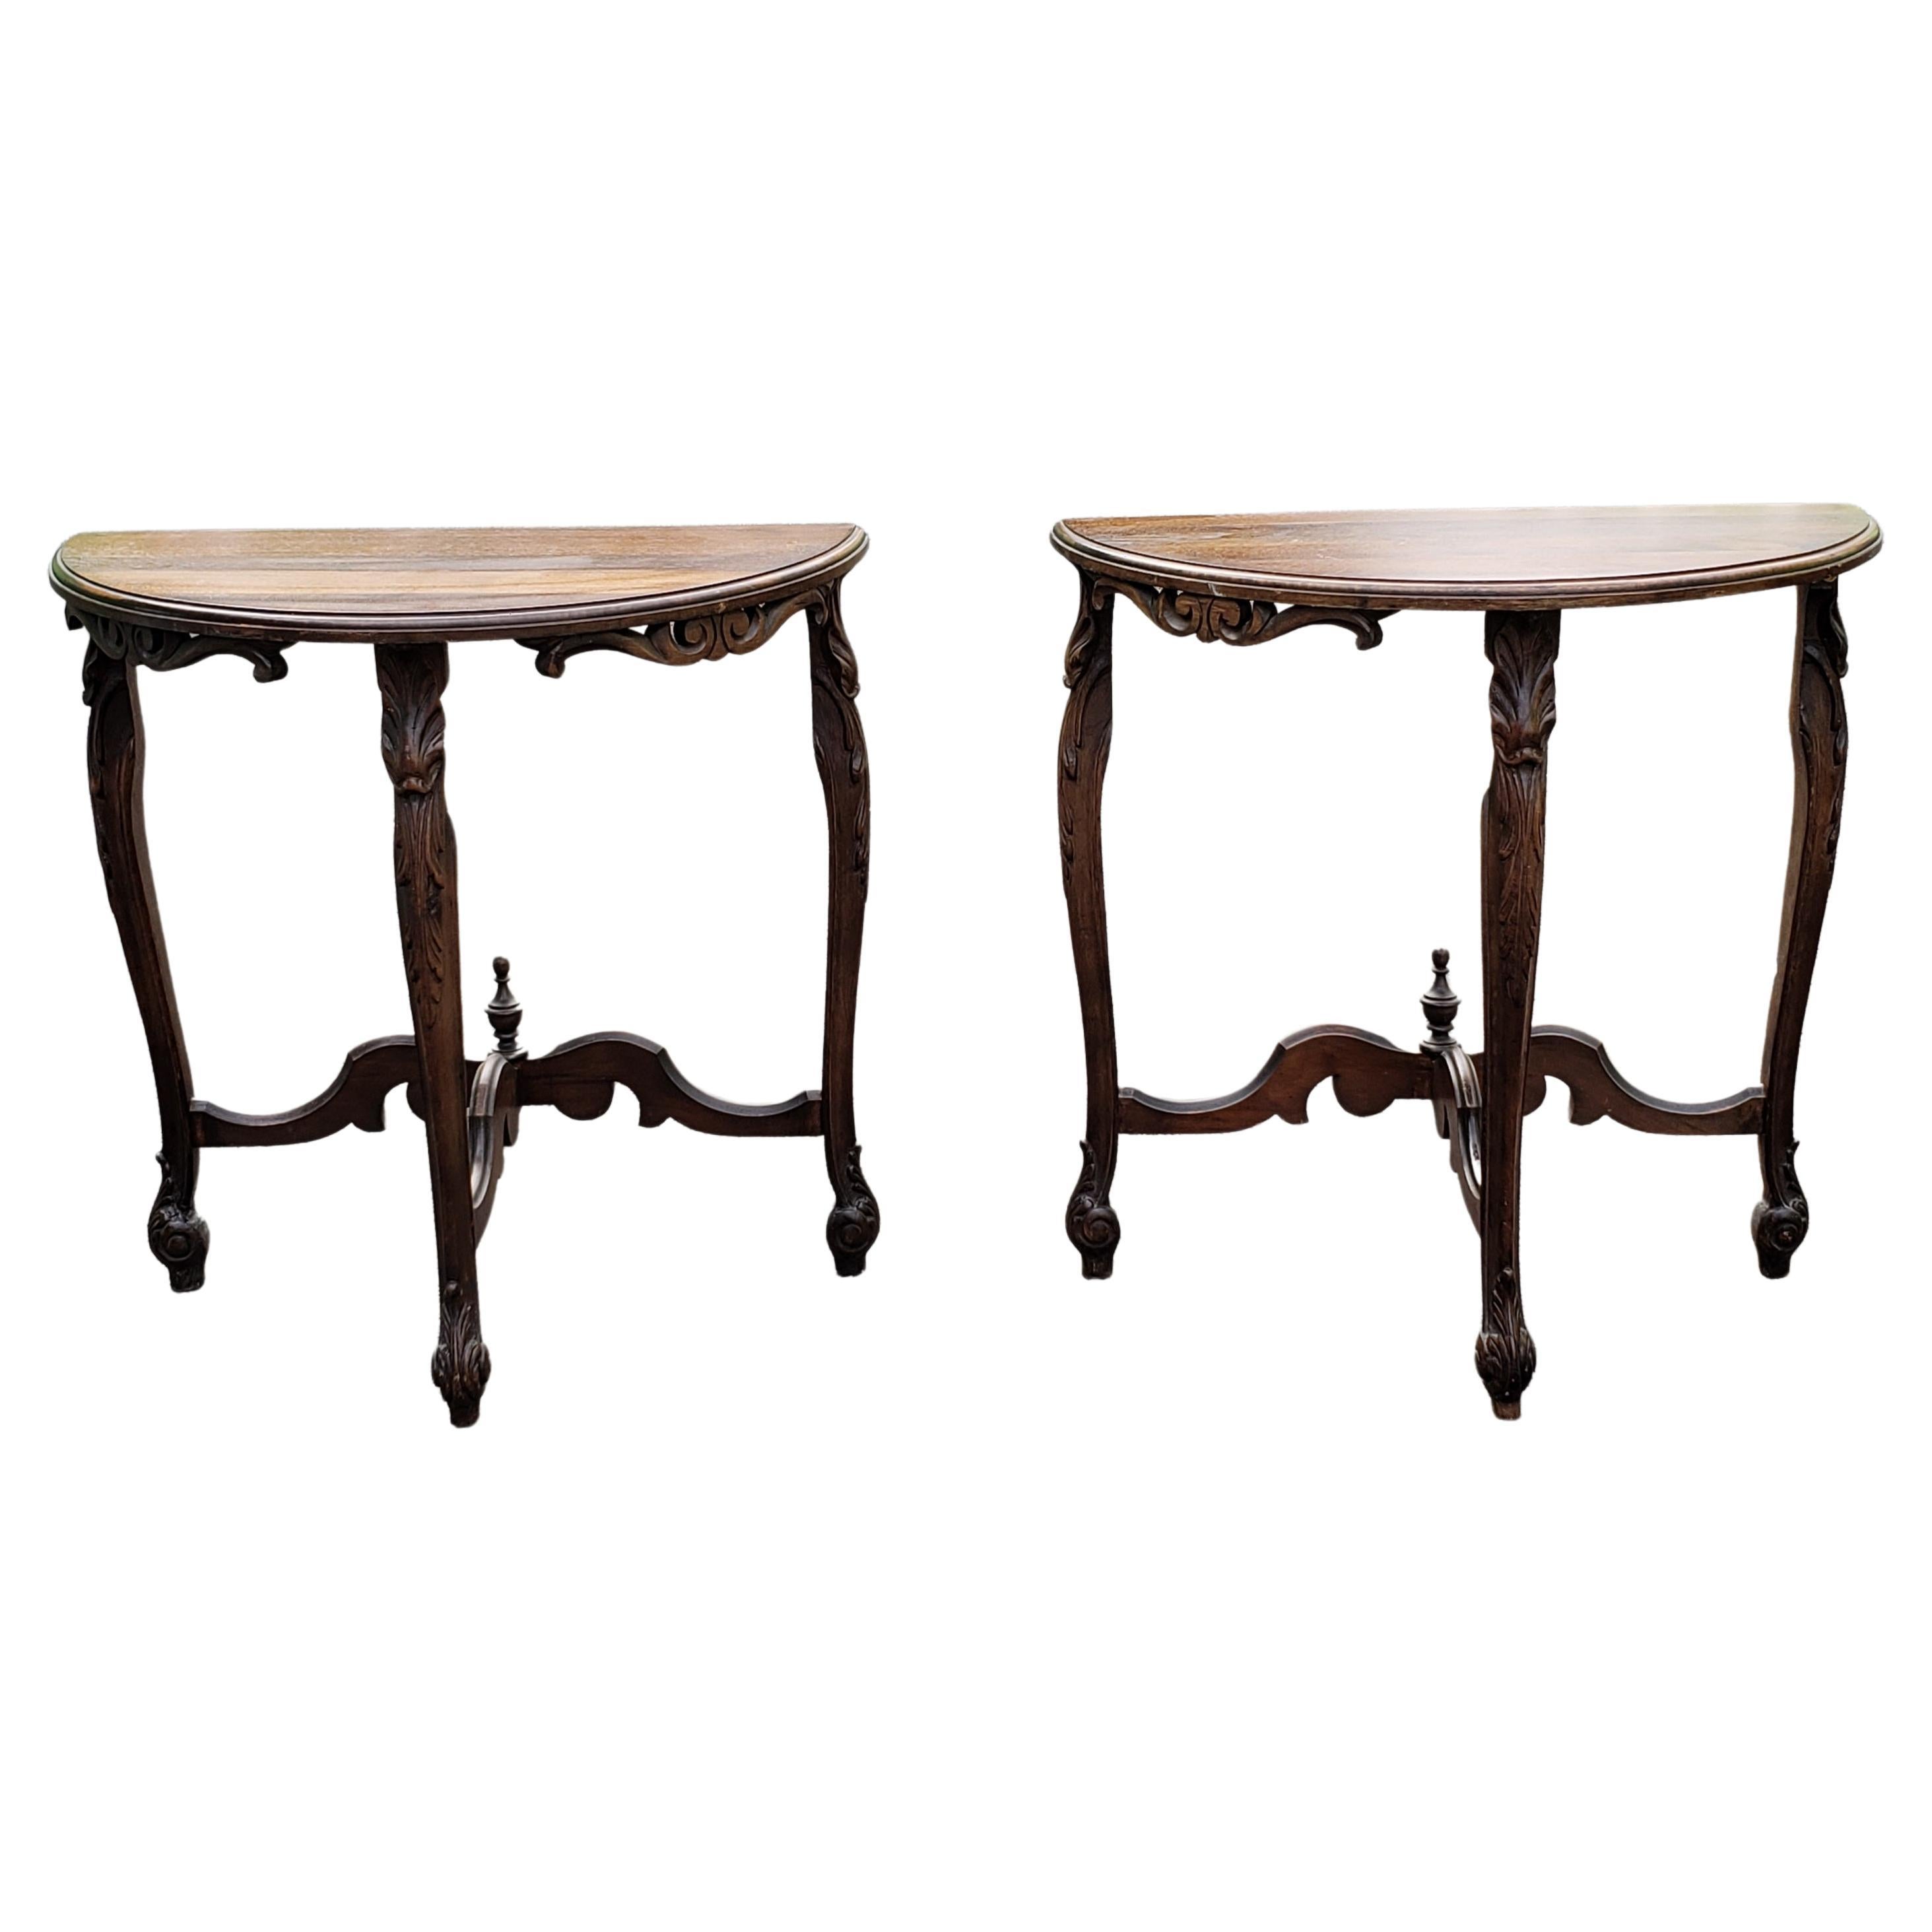 Pair of Edwardian demi-lune side tables that can joined to make a round tea table or gueridon. Beautiful leg carvings and stretchers. Solid construction.
Measures 24